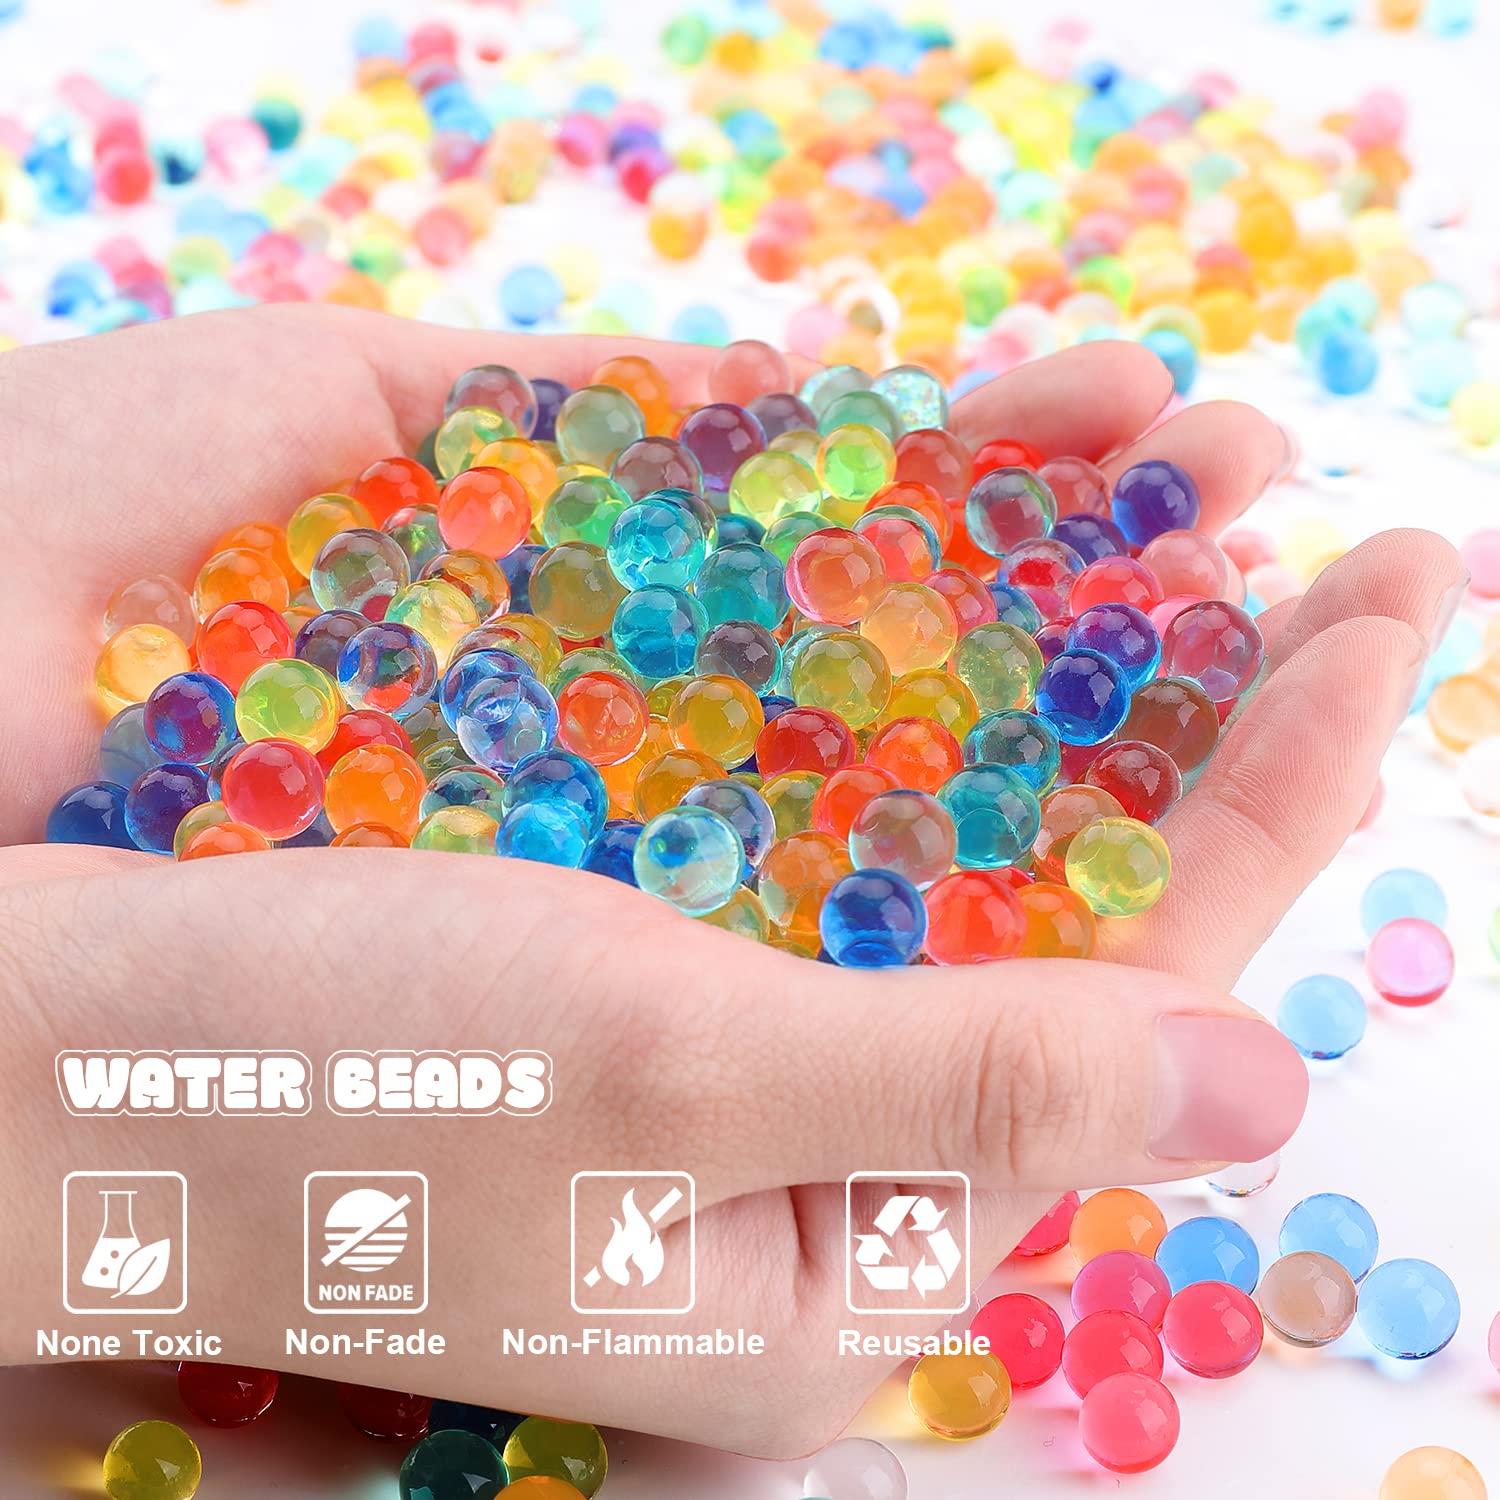 Water Beads Pack (50000 Beads) Rainbow Mix Jelly Water Growing Balls for Kids Tactile Sensory Toys, Vases, Plants, Wedding and Home Decoration